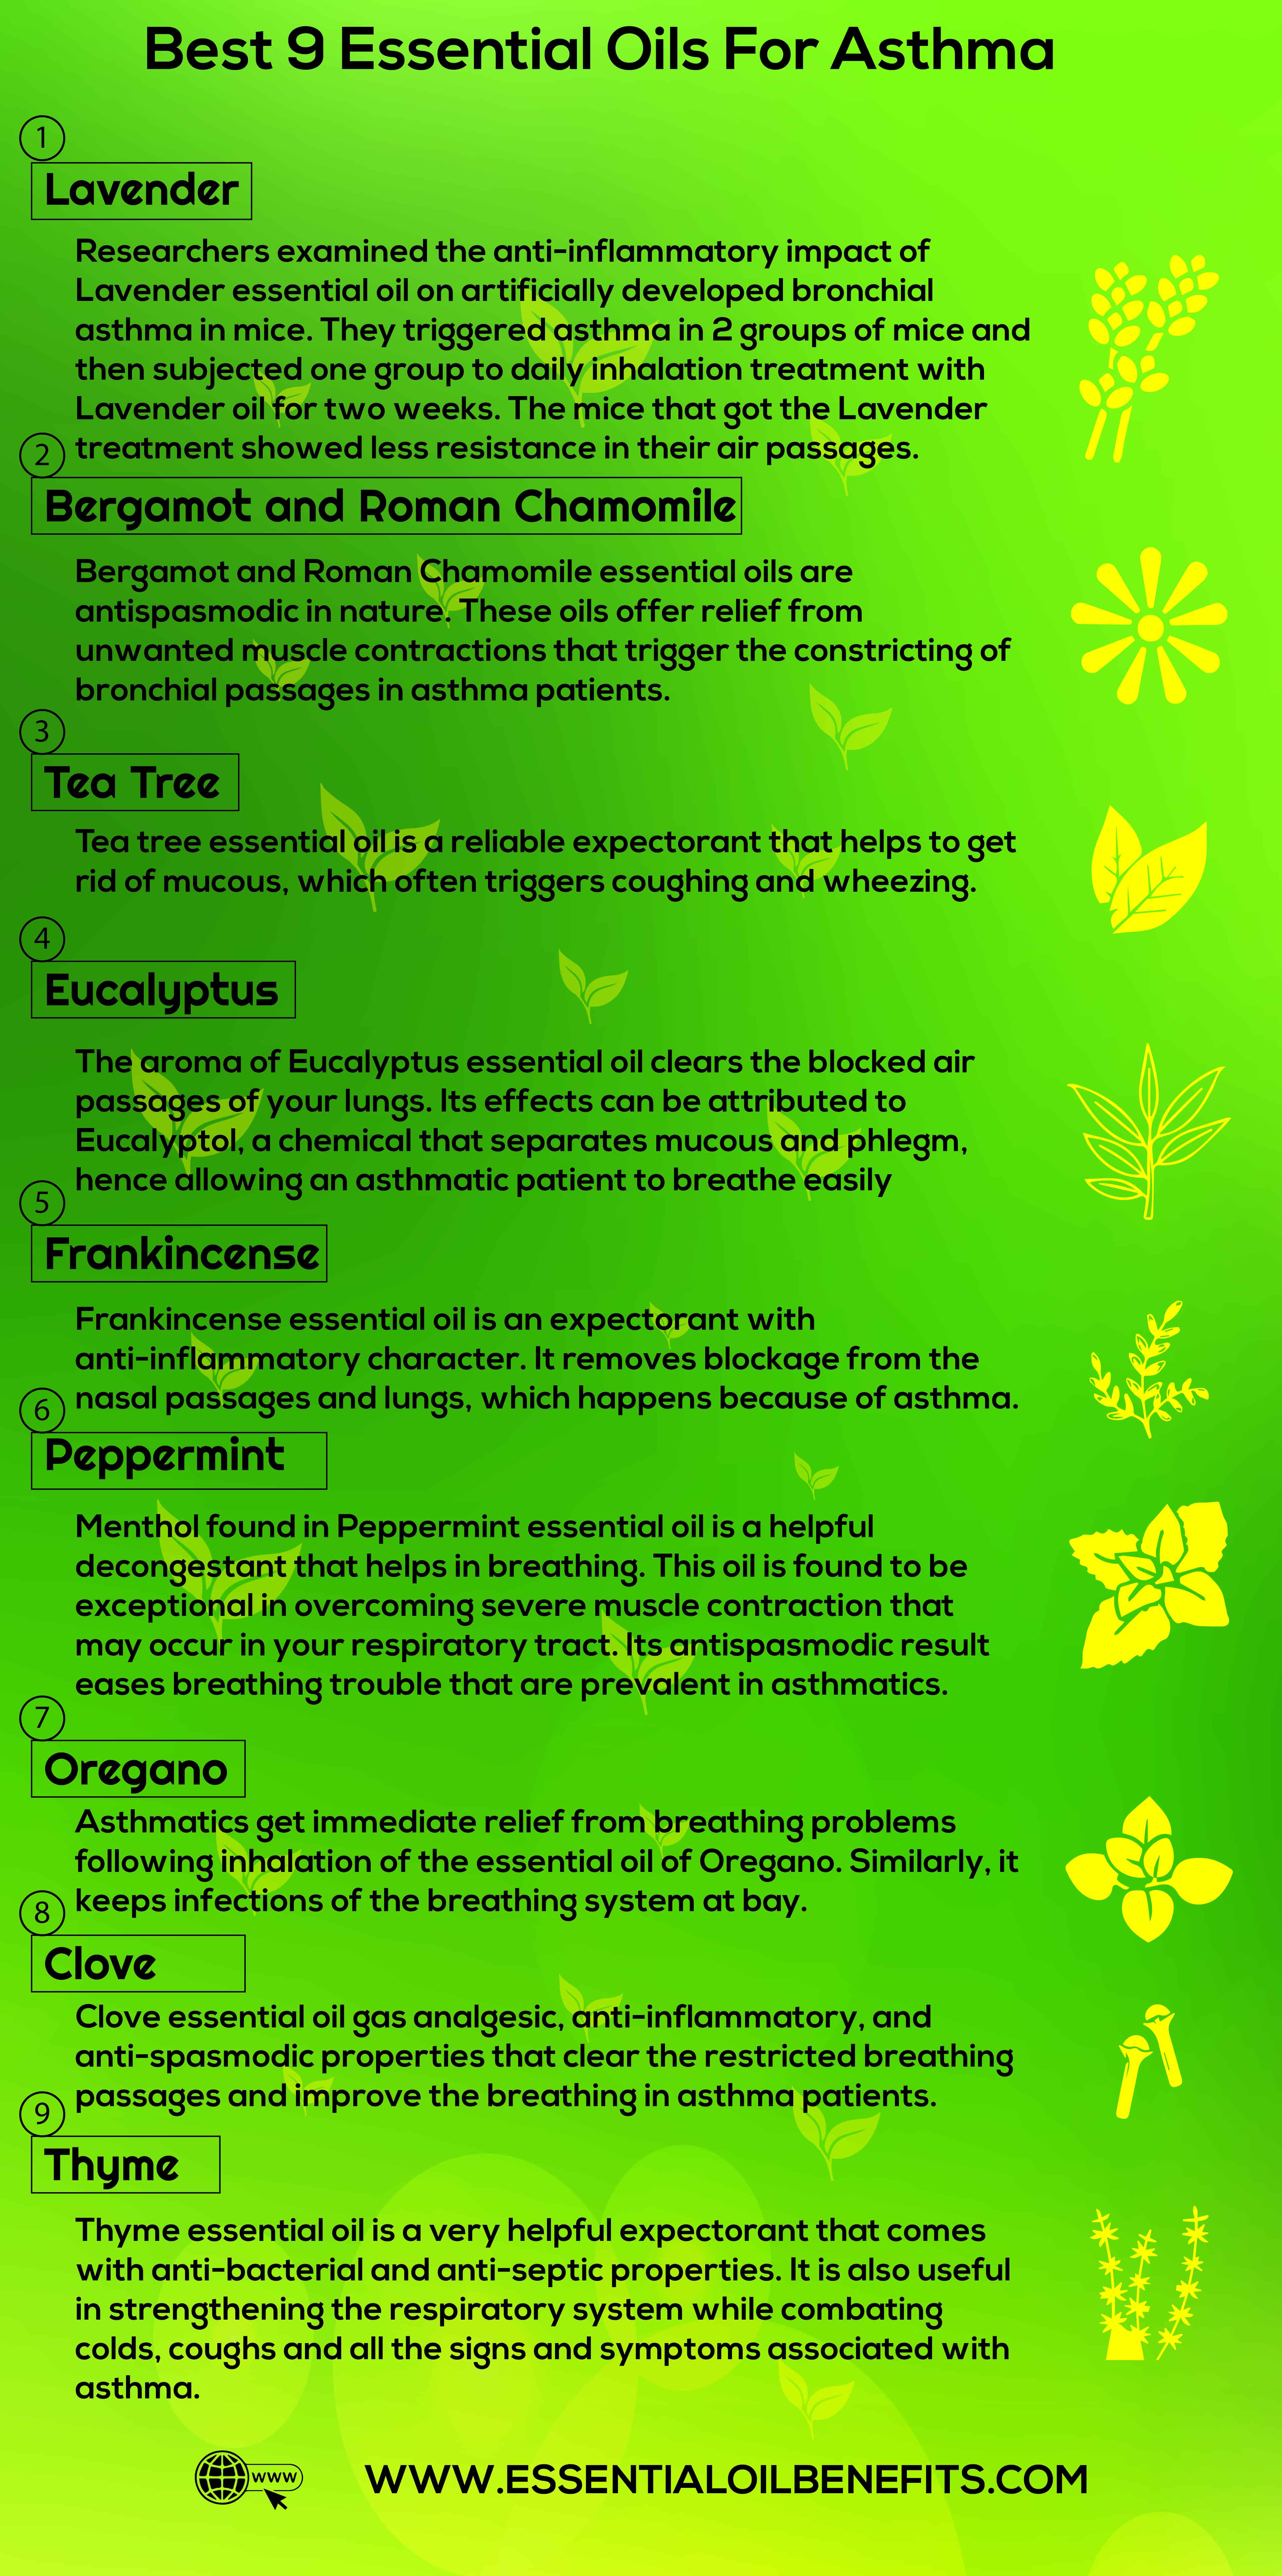 What Are The Best Essential Oils and Recipes For Asthma Relief And Treatment? Essential Oil Benefits